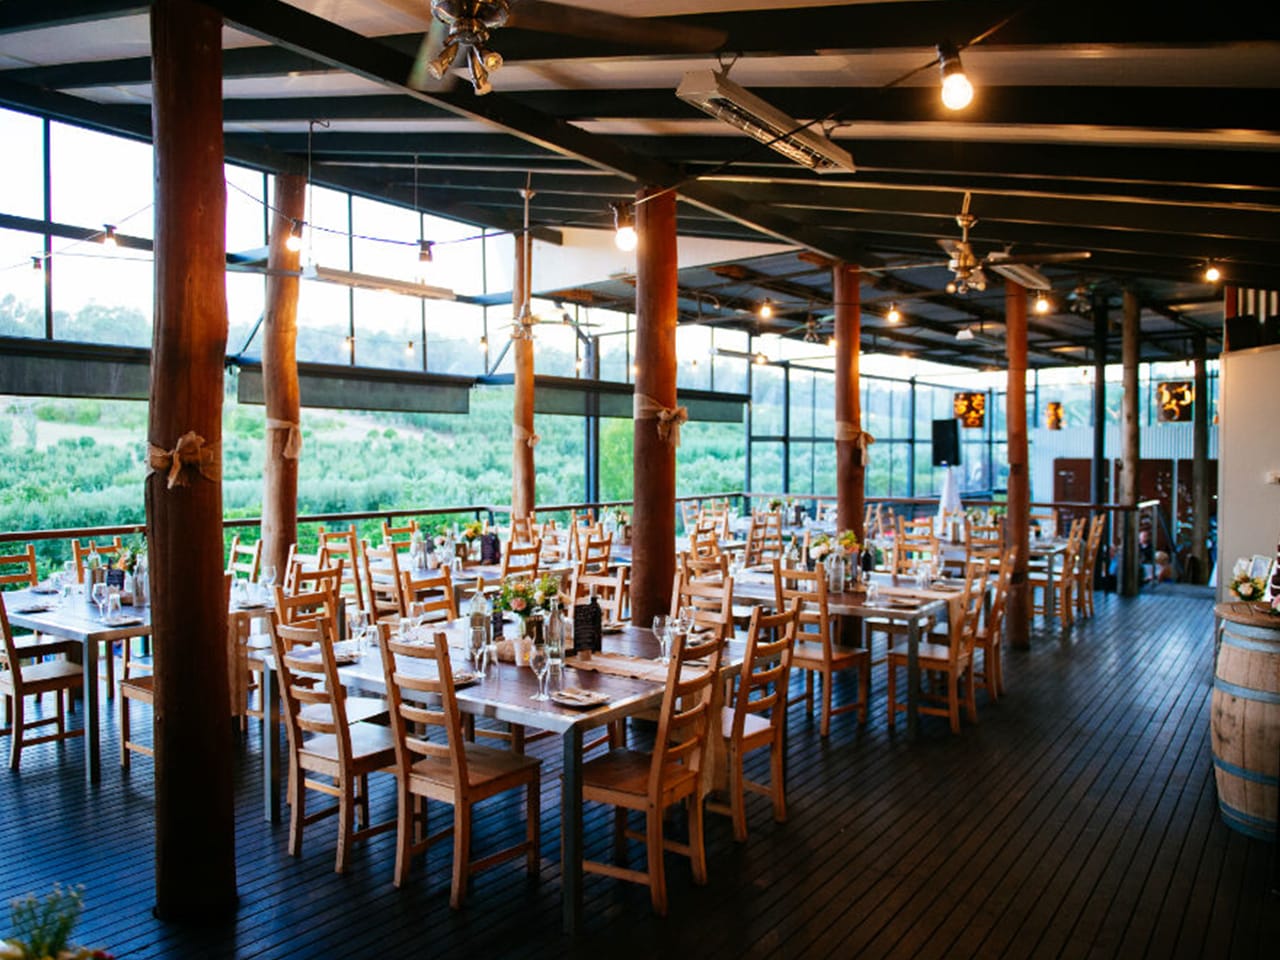 Chairs And Tables Inside The Function Room With Wine Cask On The Side, Hanging Lights And Perth Hills View